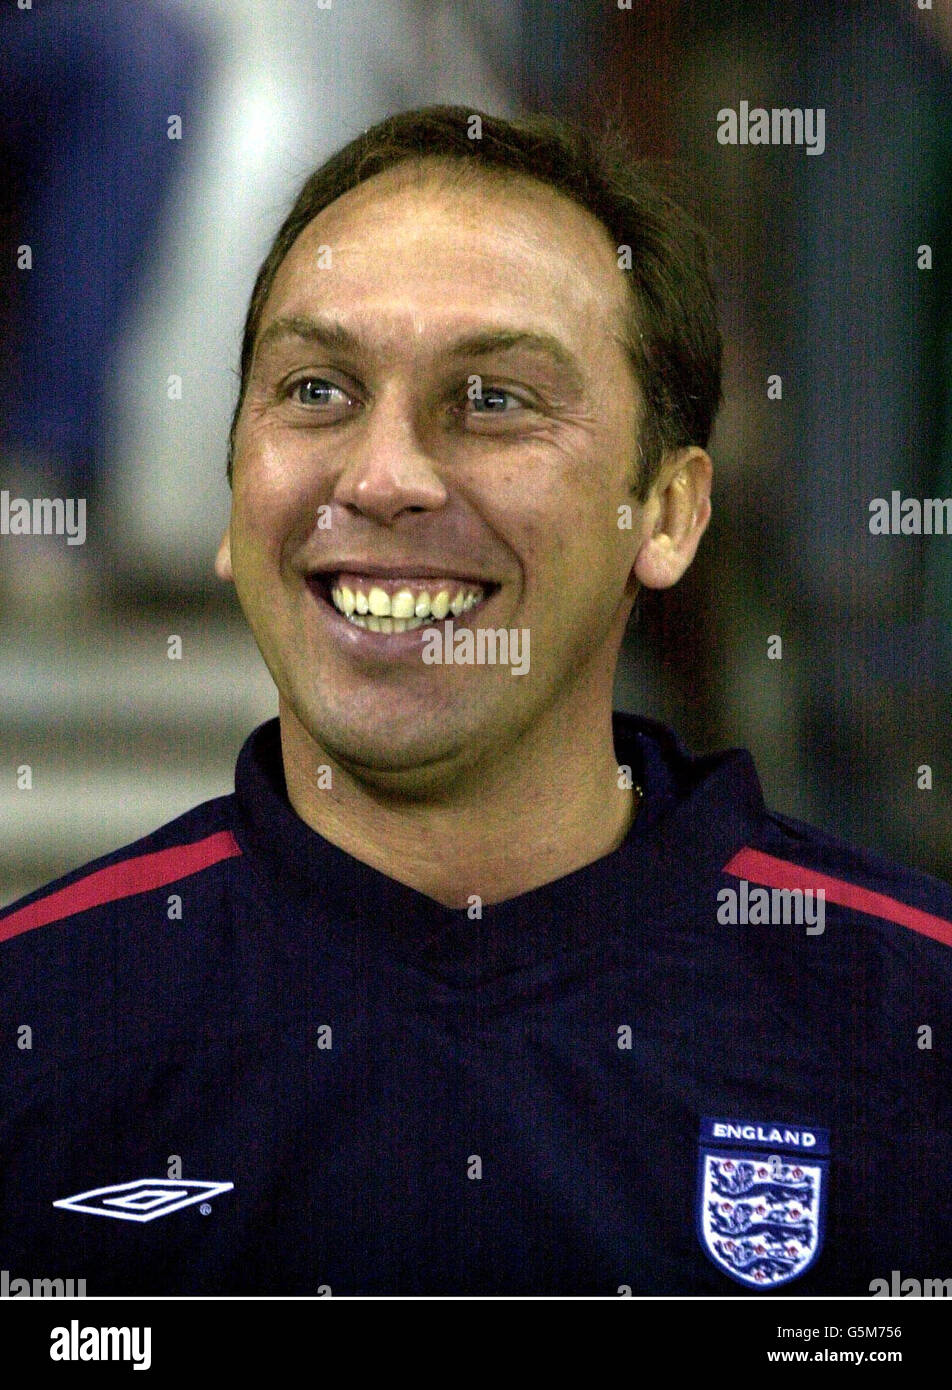 England's Under 21 manager David Platt during the play-off, second leg of the UEFA U21 Championship Qualifier, between England v Holland at Pride Park, Derby.. Photo Rui Vieira. Stock Photo